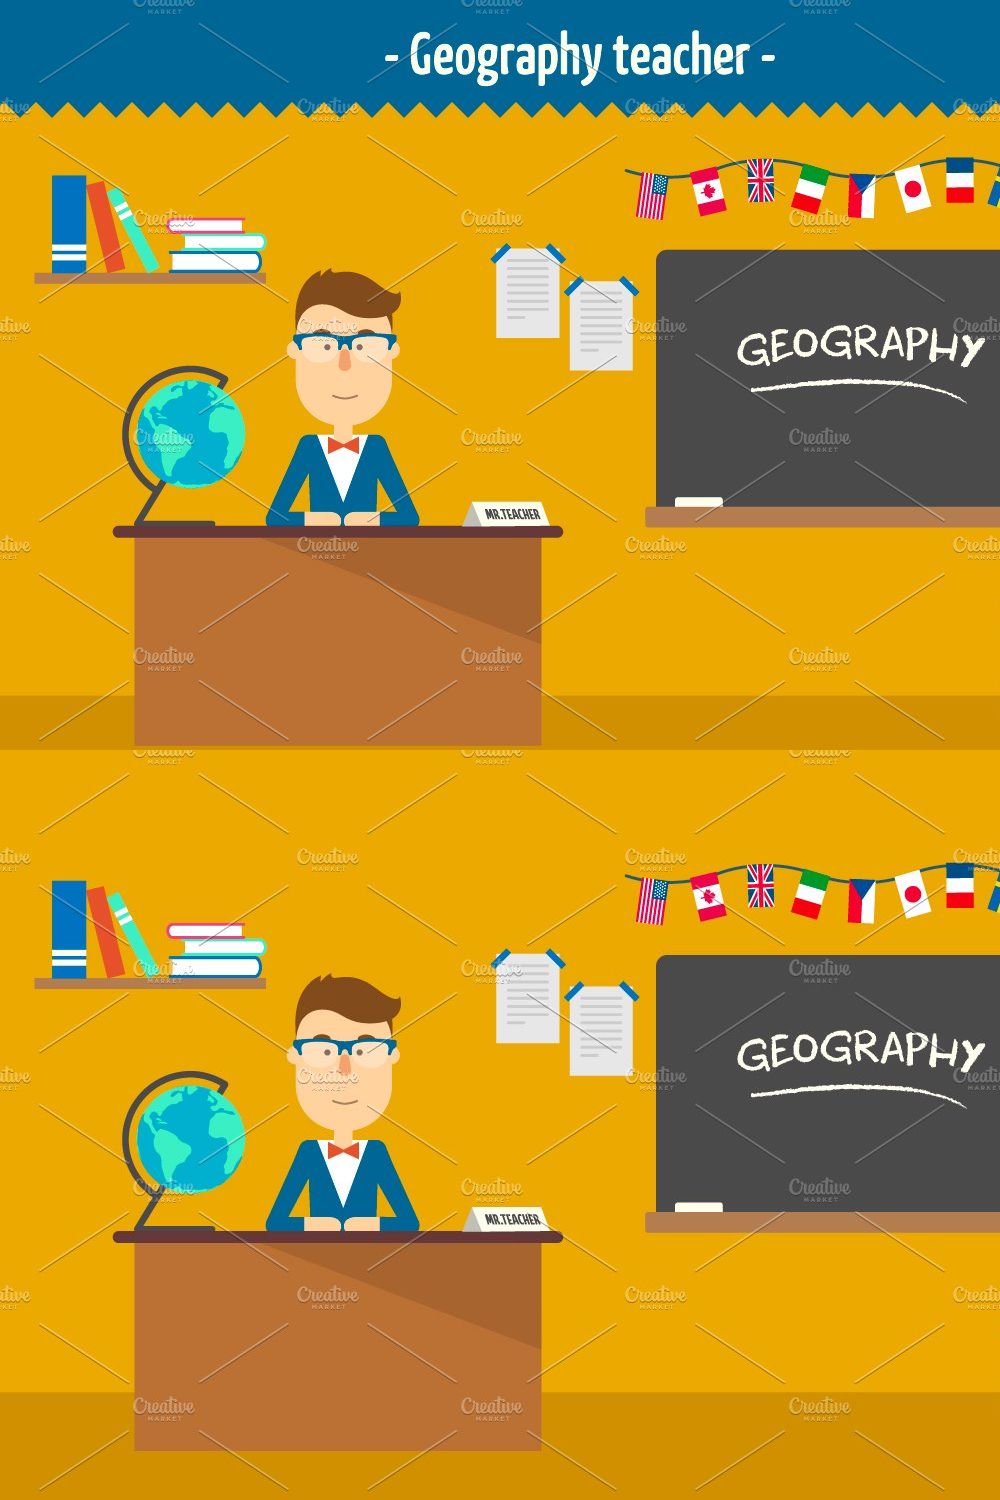 Geography teacher. Two illustrations pinterest preview image.